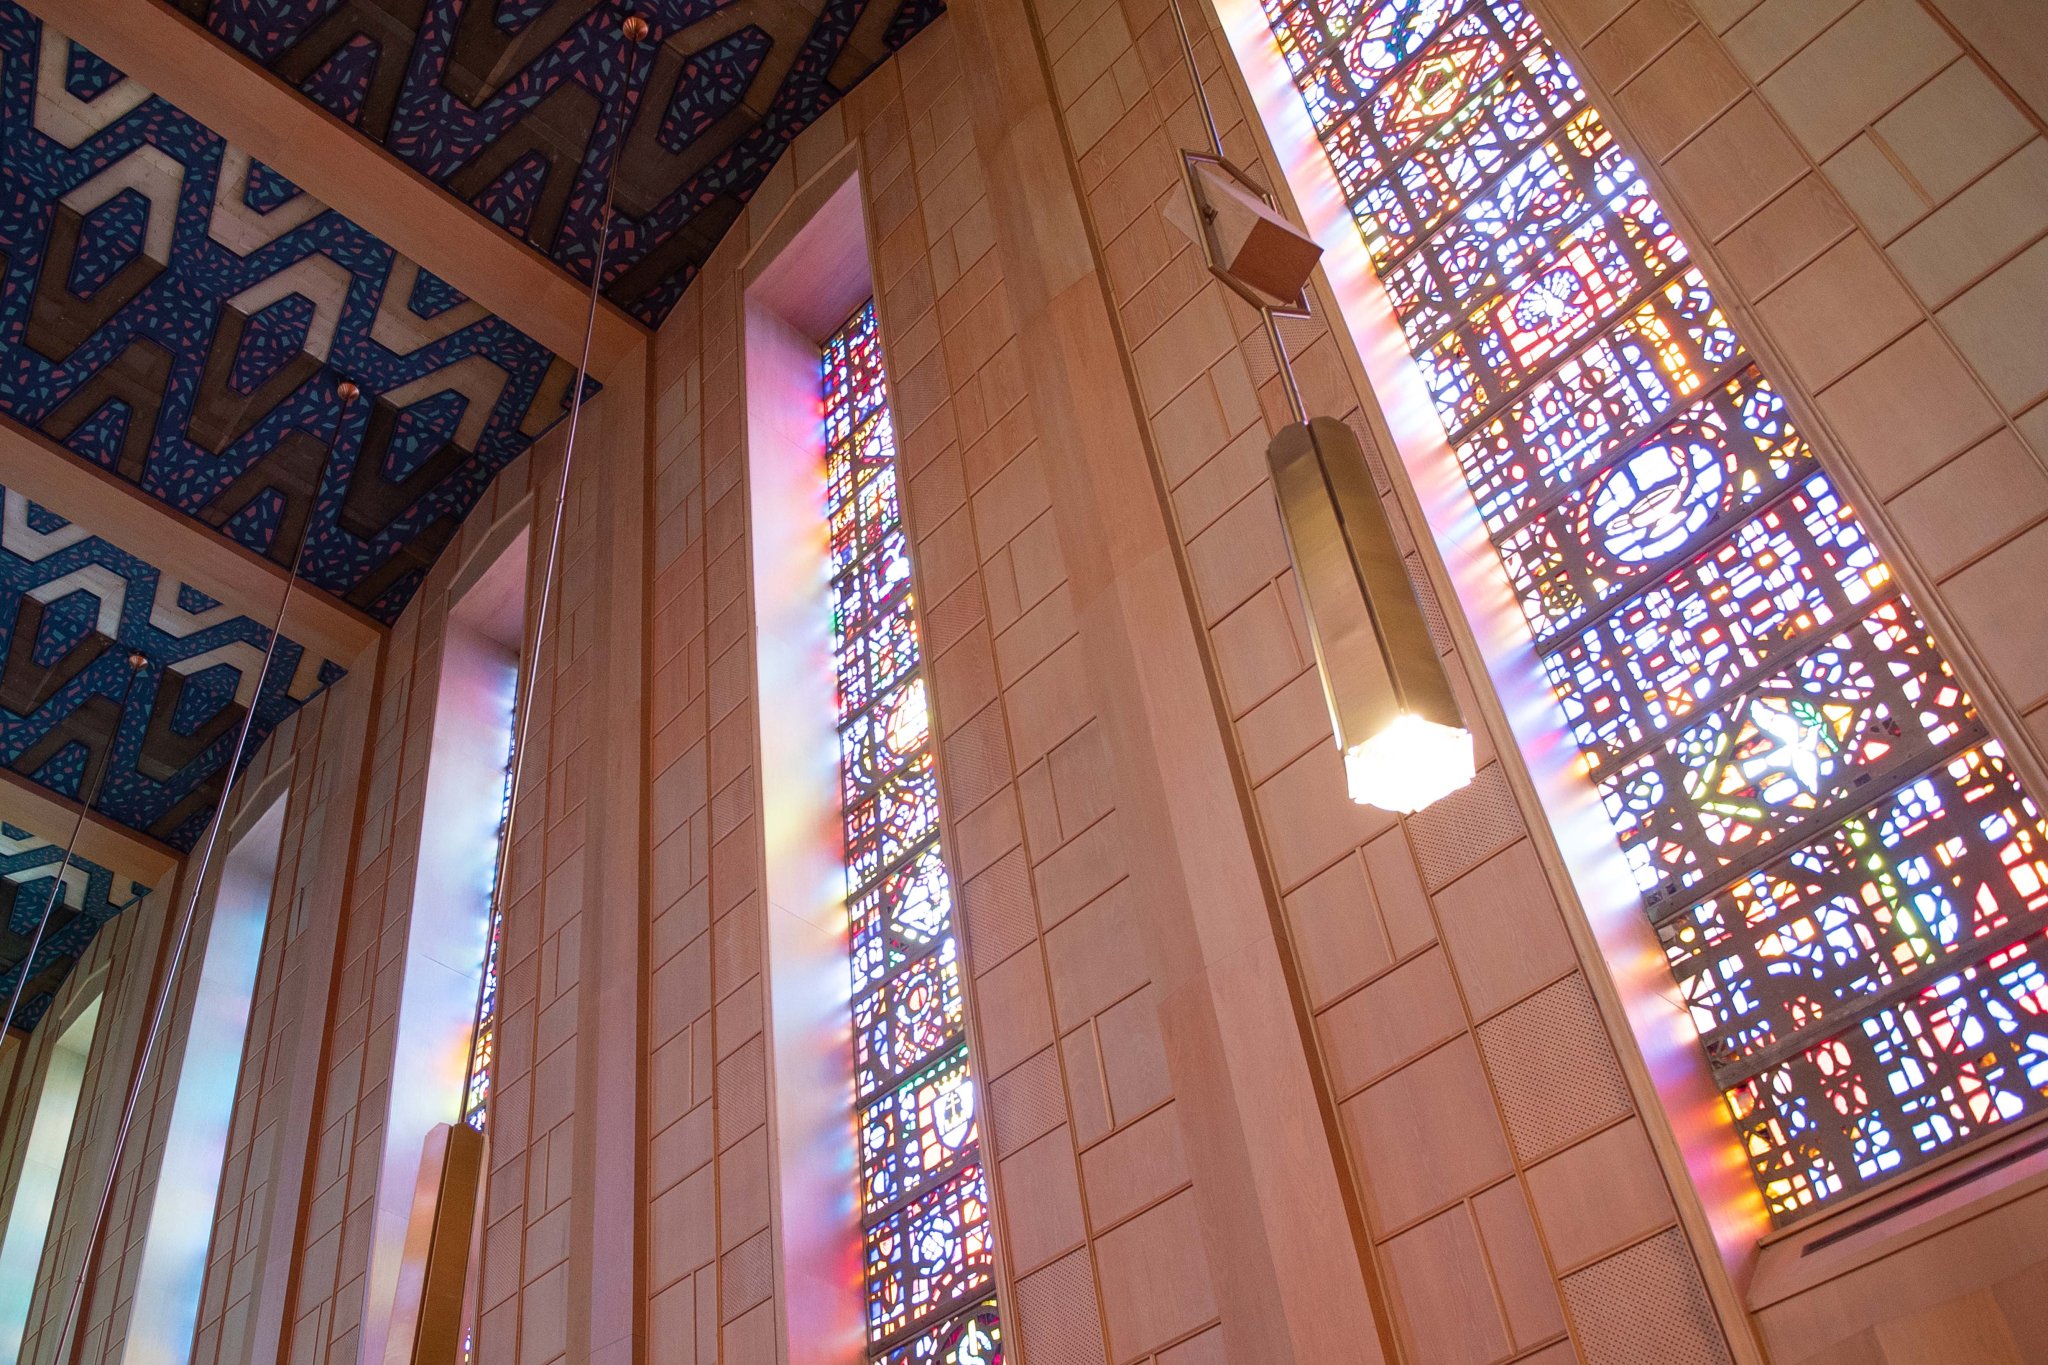 Chapel Windows Featuring Stained Glass